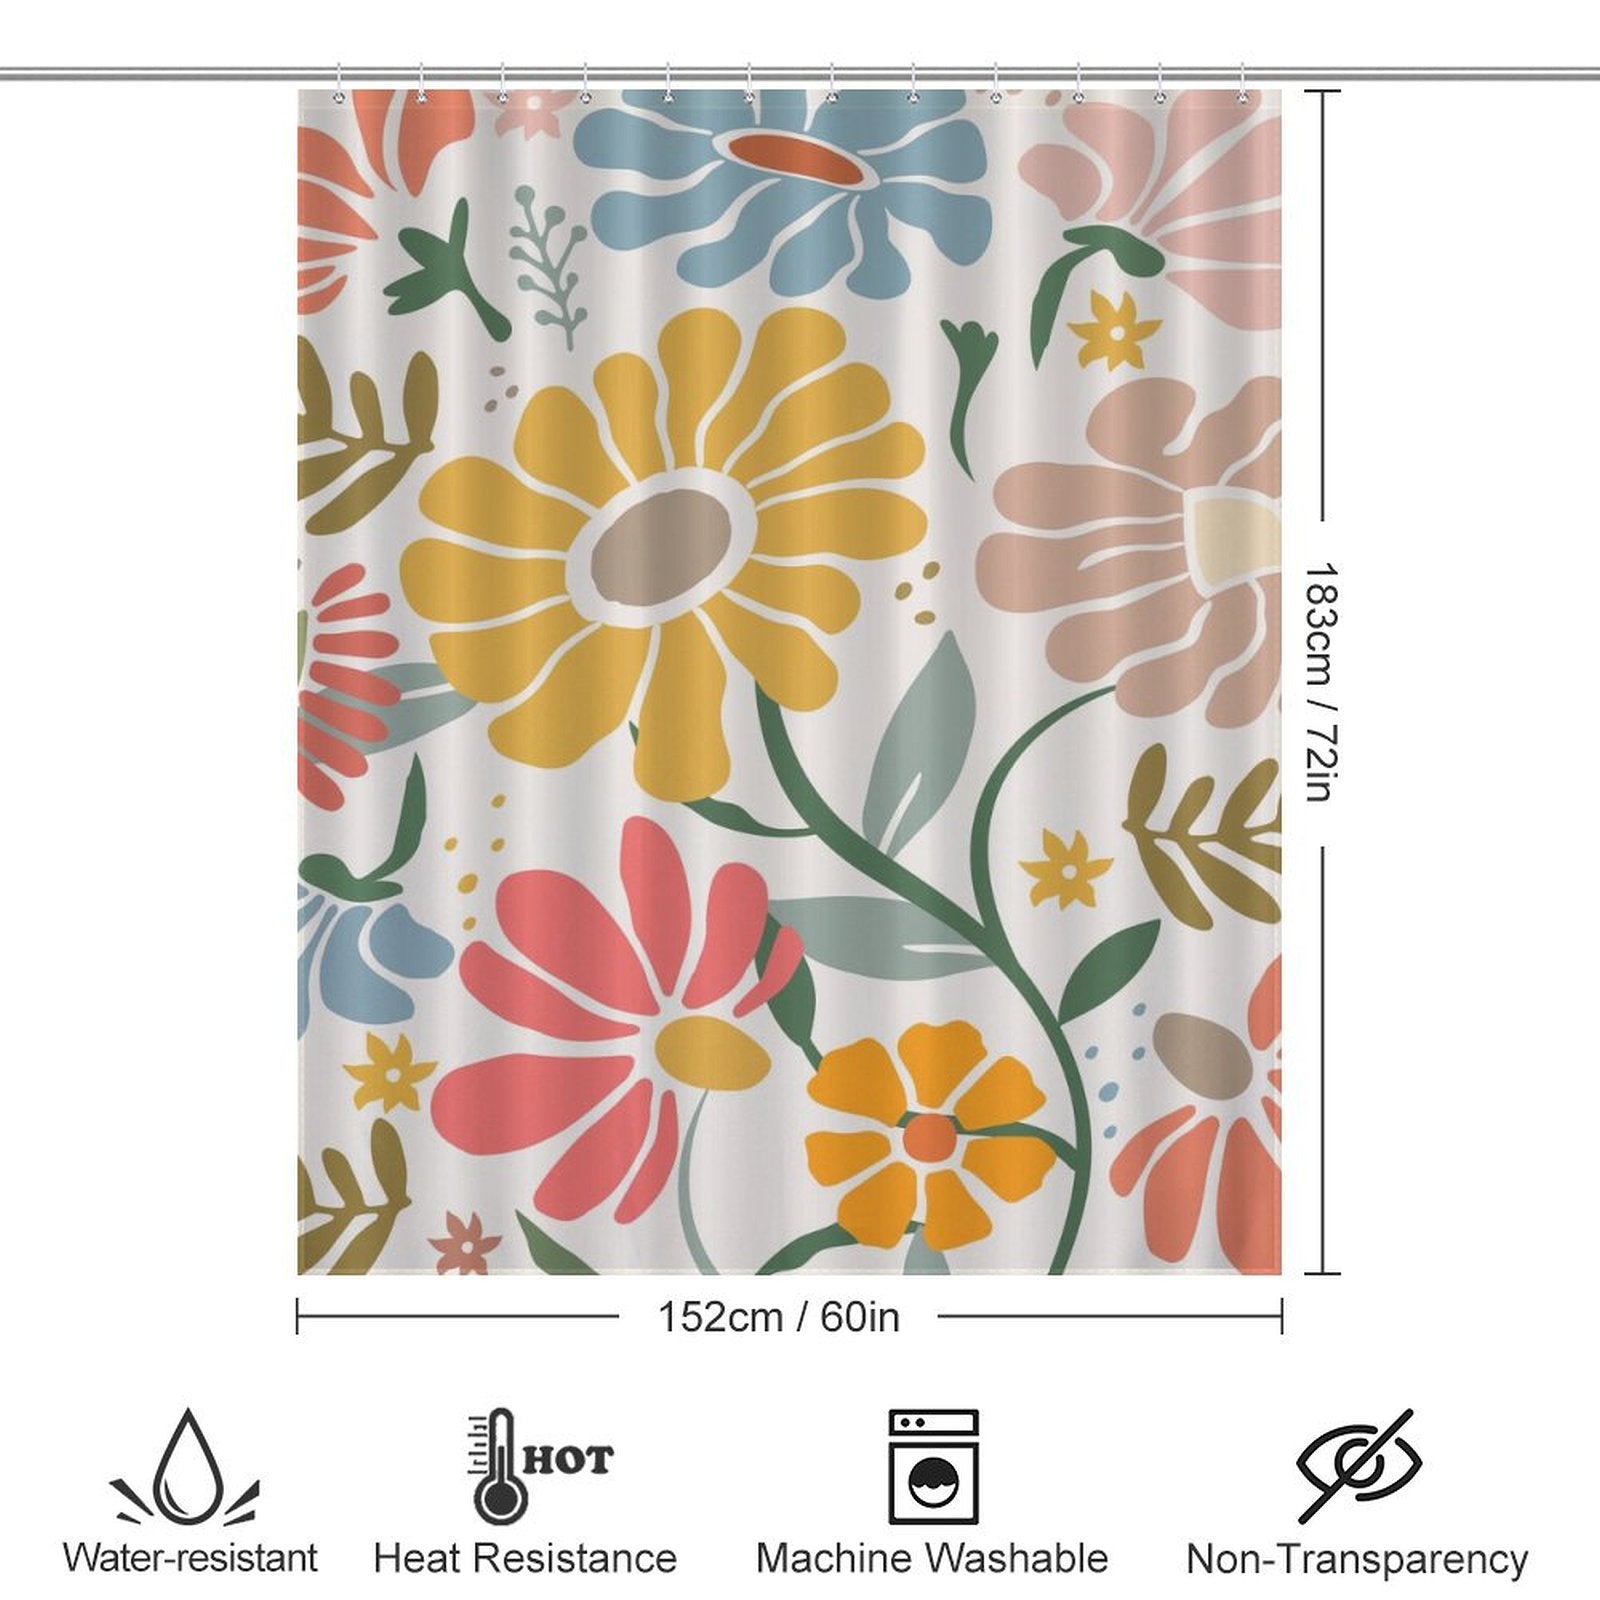 Cotton Cat Boho Colorful Yellow Flower Leaves Minimalist Watercolor Art Painting Floral Shower Curtain-Cottoncat, adorned with vibrant yellow flowers and leaves, measuring 183 cm by 152 cm. It has water-resistant, heat-resistant, and machine washable properties, while maintaining a non-transparent finish for perfect privacy.